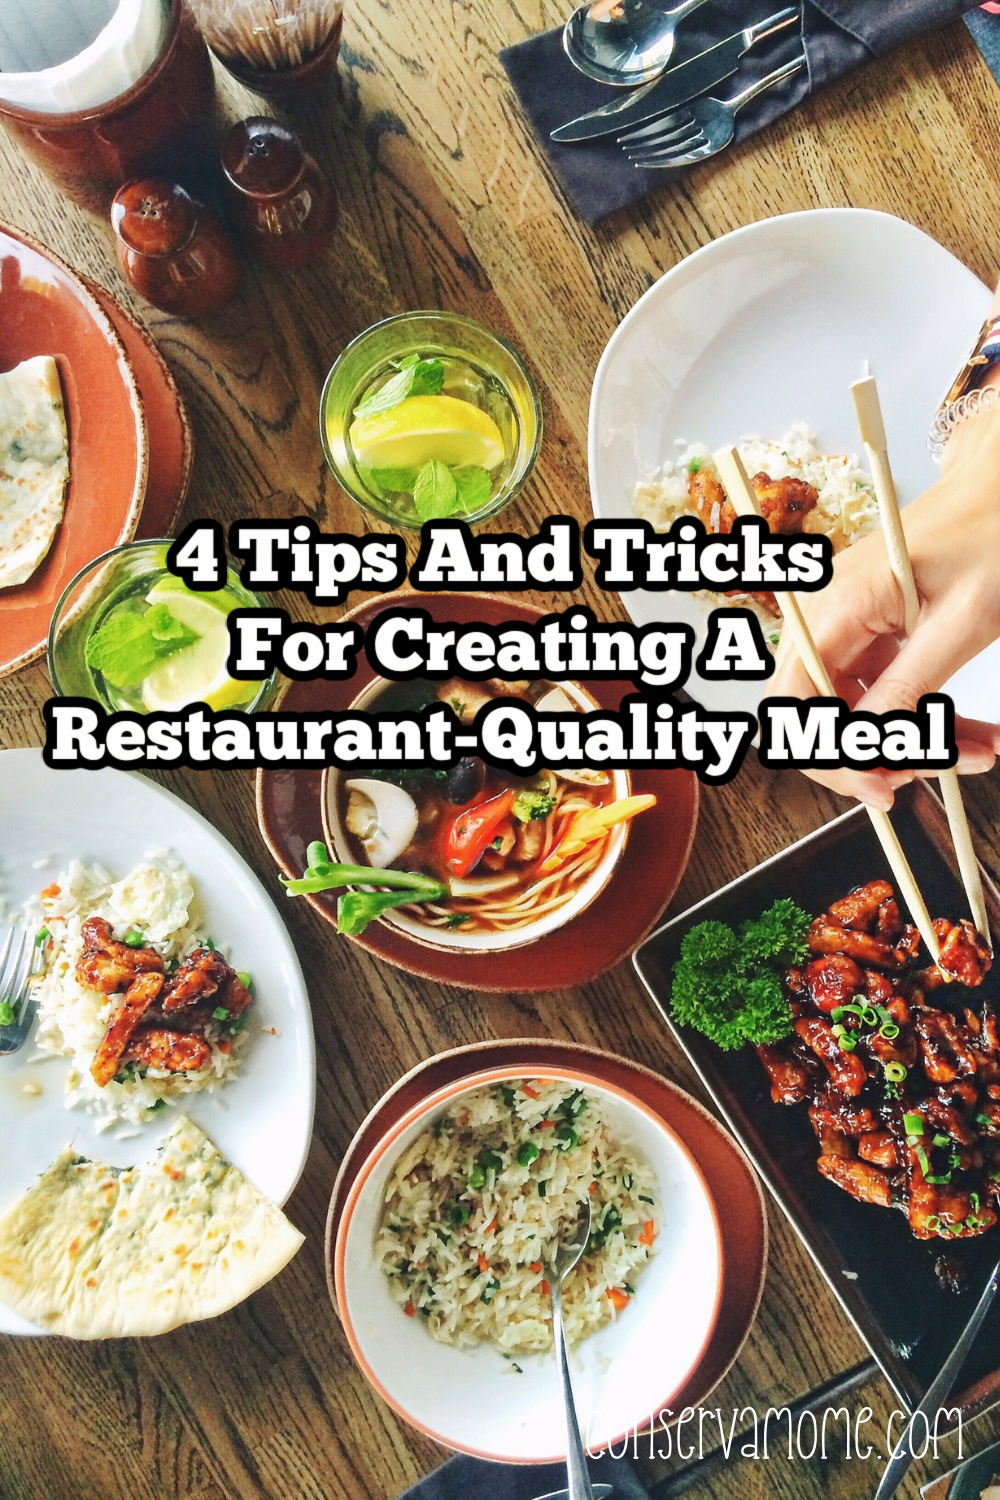 4 Tips And Tricks For Creating A Restaurant-Quality Meal